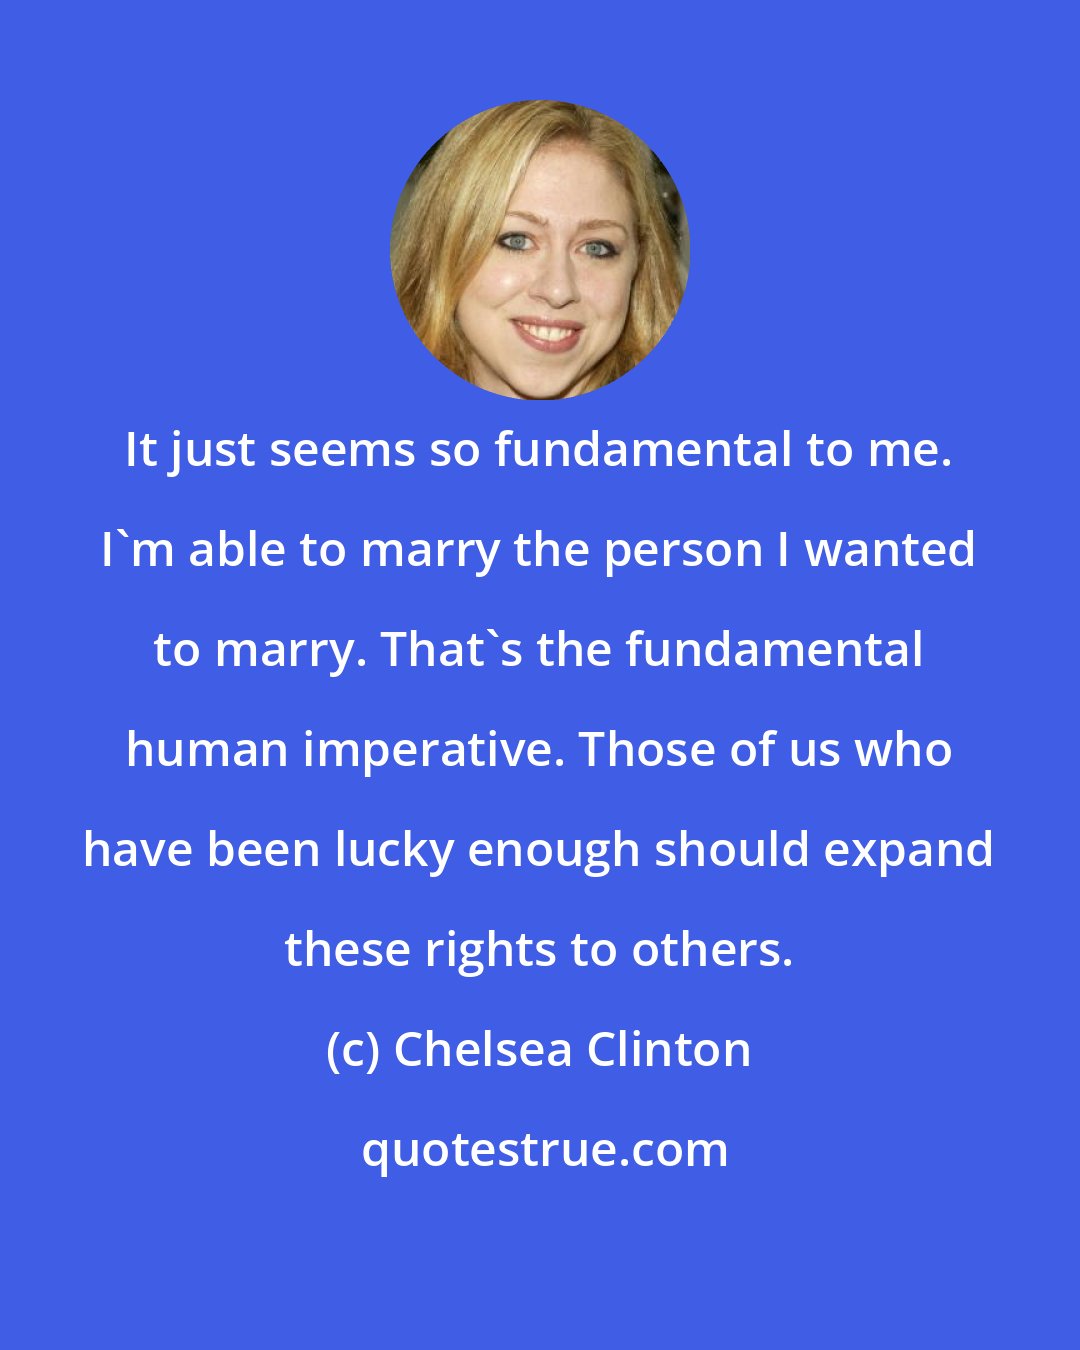 Chelsea Clinton: It just seems so fundamental to me. I'm able to marry the person I wanted to marry. That's the fundamental human imperative. Those of us who have been lucky enough should expand these rights to others.